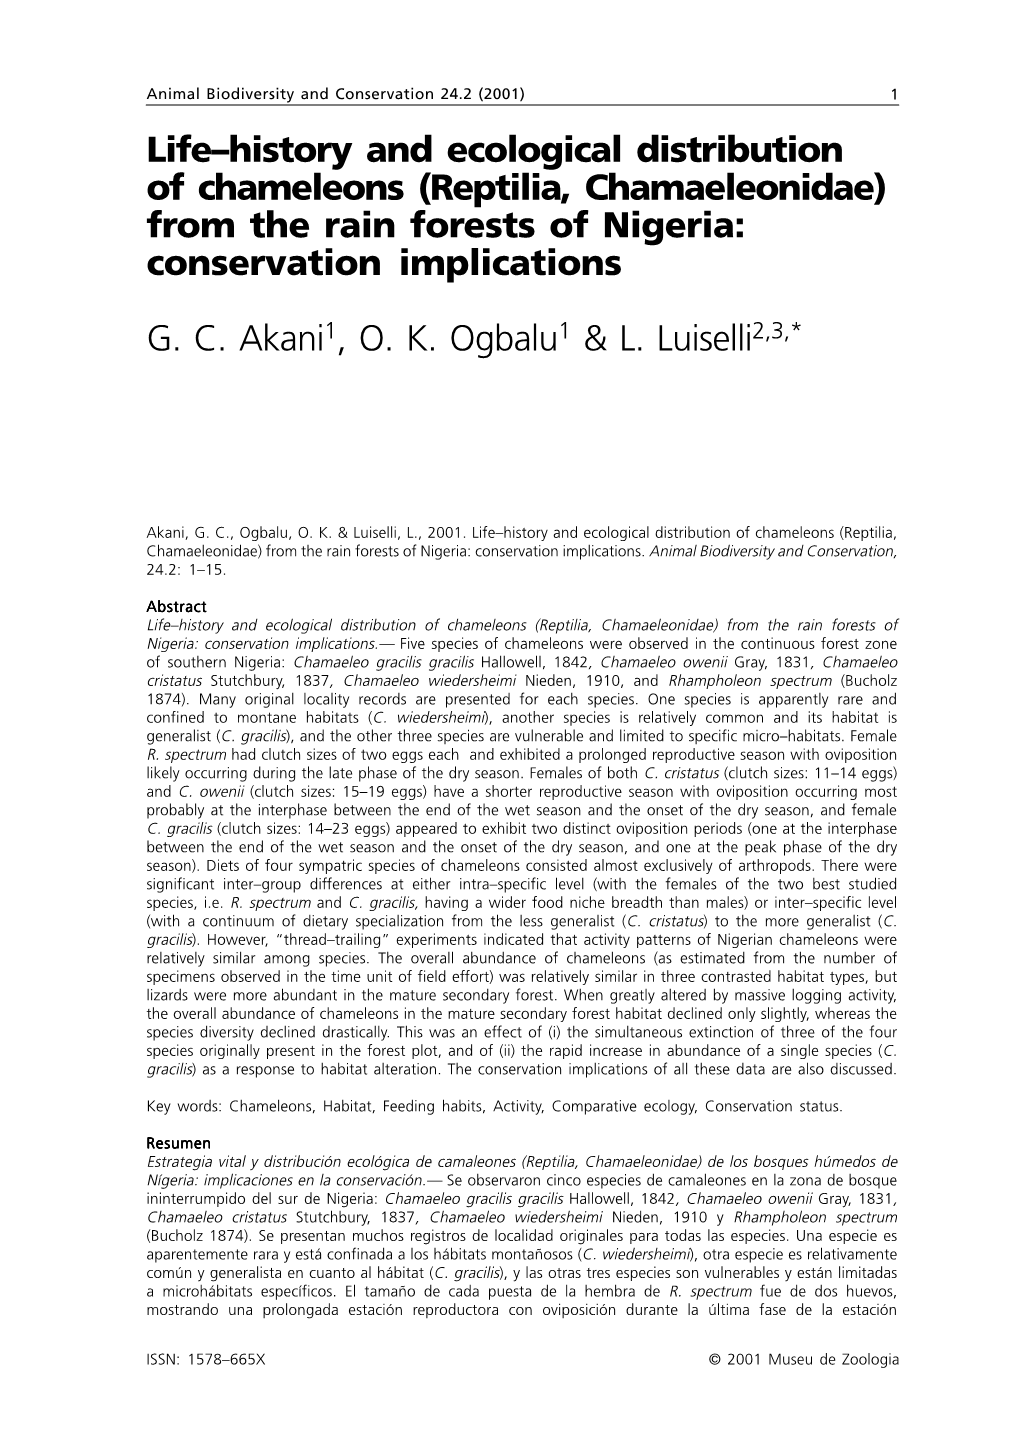 Life–History and Ecological Distribution of Chameleons (Reptilia, Chamaeleonidae) from the Rain Forests of Nigeria: Conservation Implications